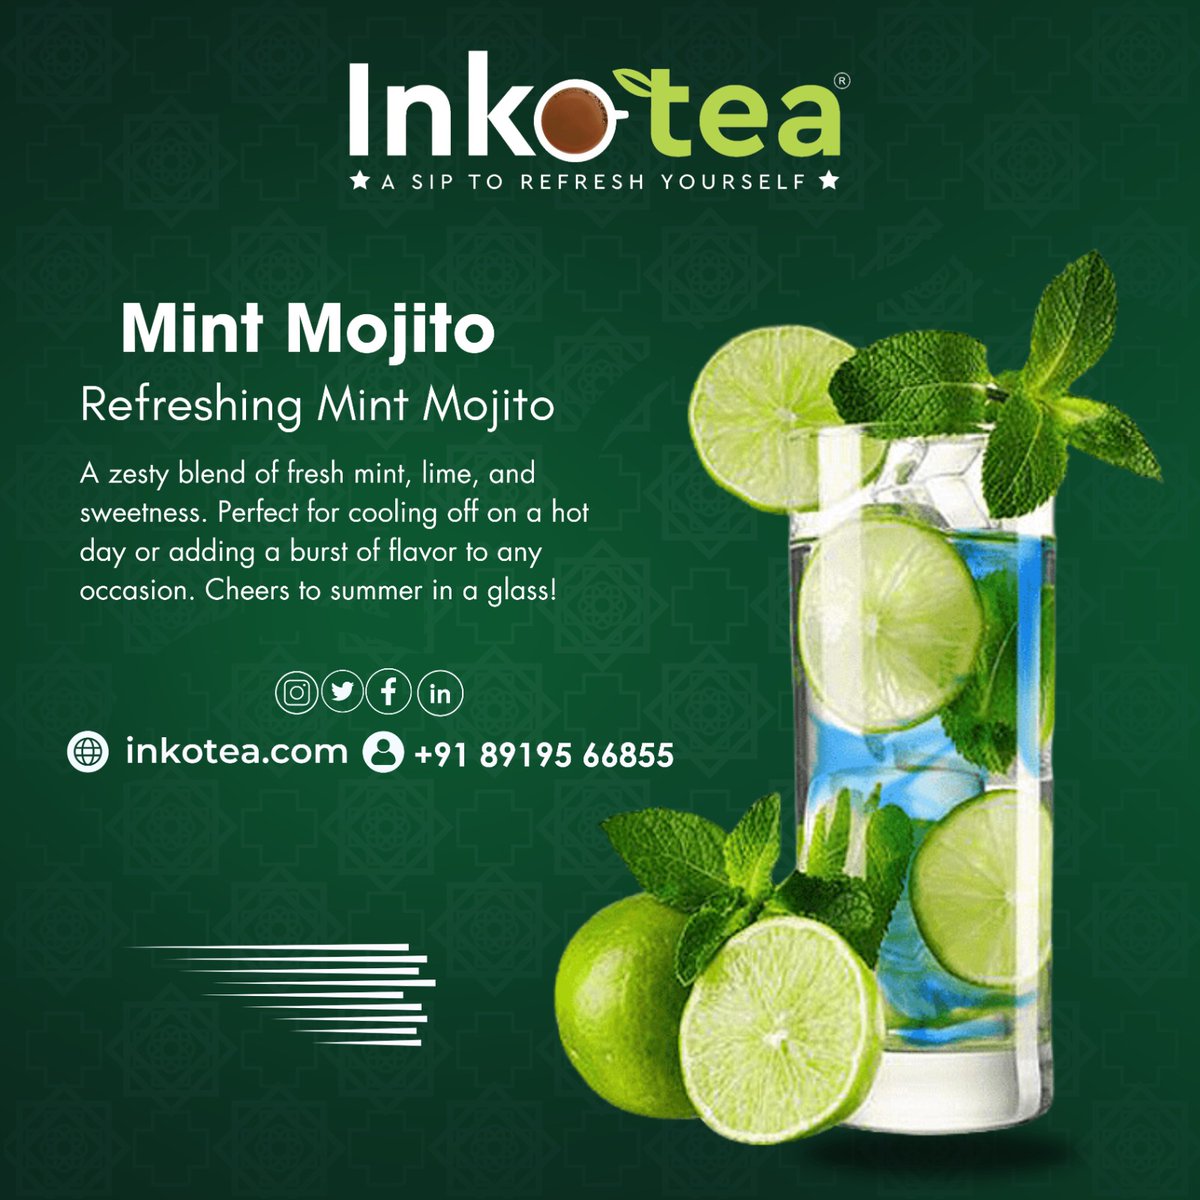 🌿🍹 Introducing Inkotea's Refreshing Mint Mojito! 
Dive into a world of tantalizing taste with our latest creation – the Mint Mojito!
#Inkotea #MintMojito #Refreshment #SummerVibes #DeliciousDrinks #ThirstQuencher #Gingertea #SavorTheSip #TeaFlavors #TeaExploration #Tea